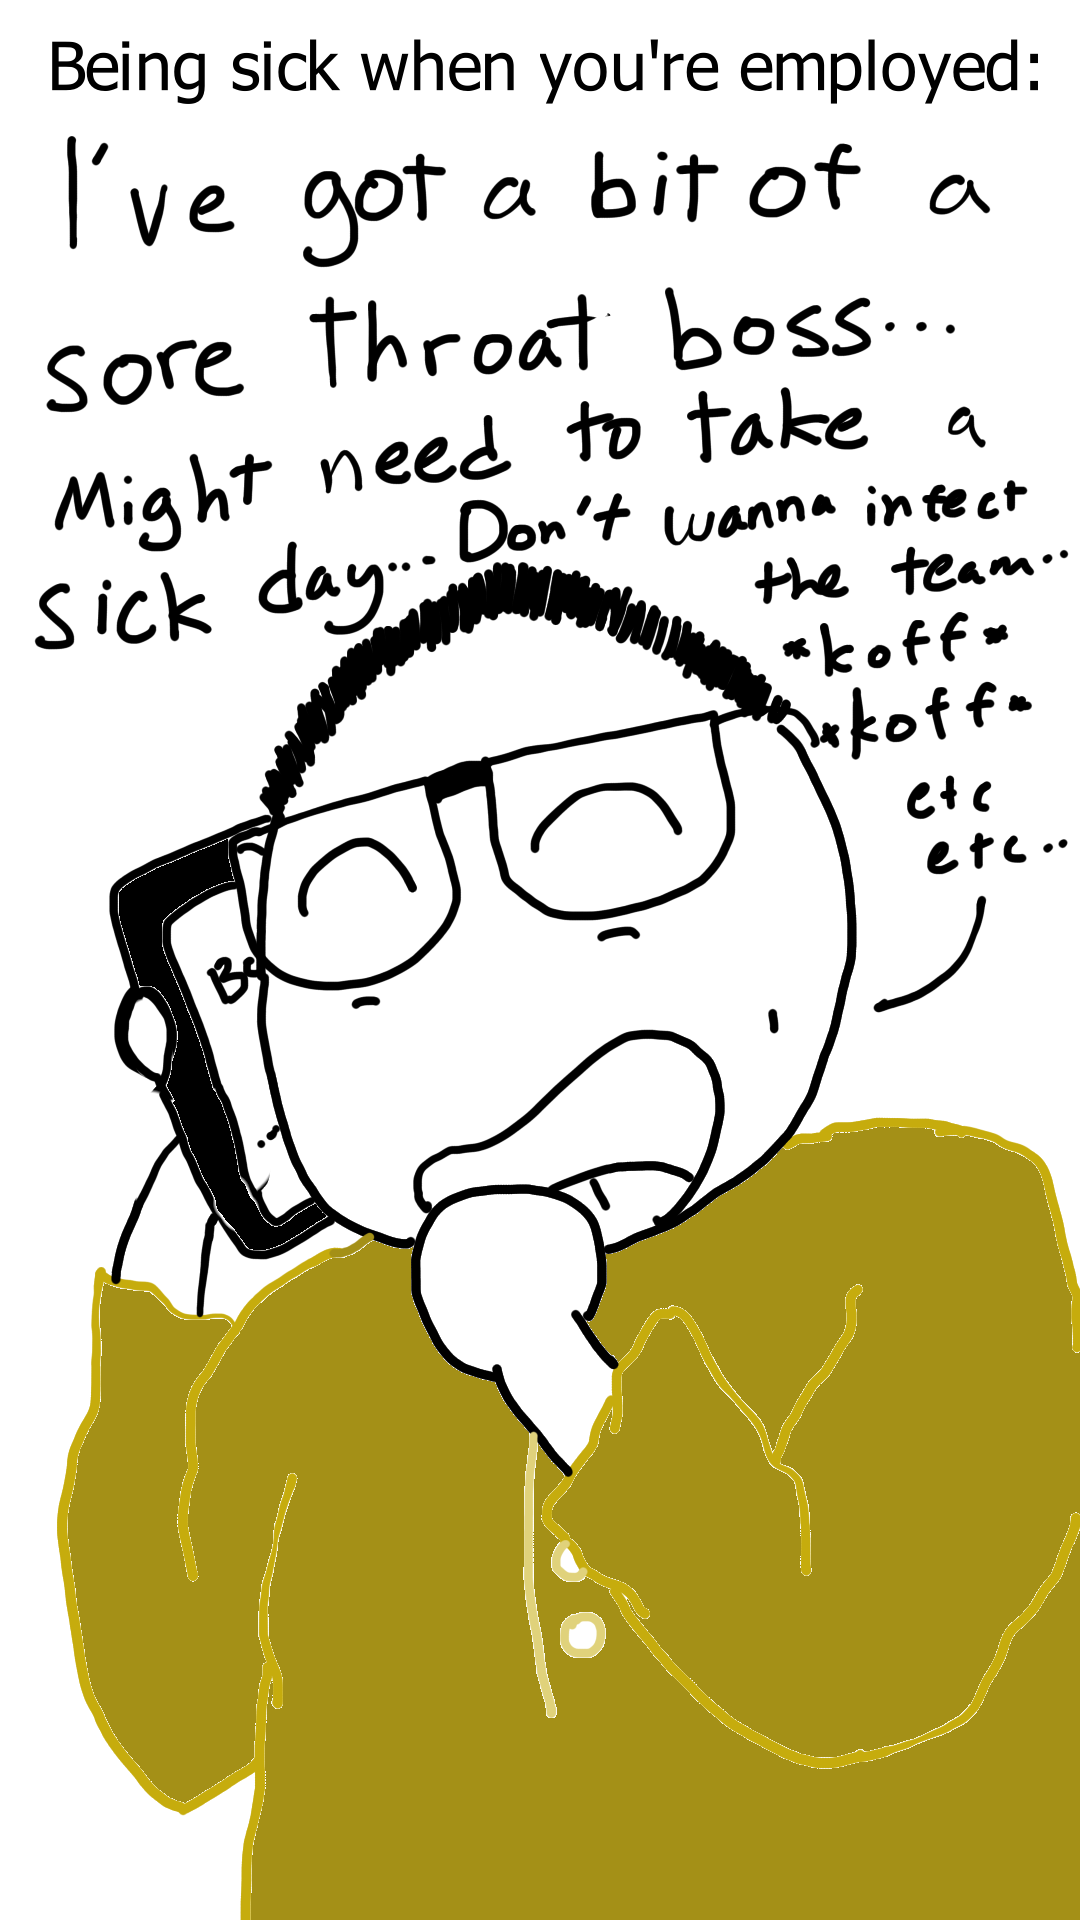 Sam pretends to be sick so that he doesn't have to work.